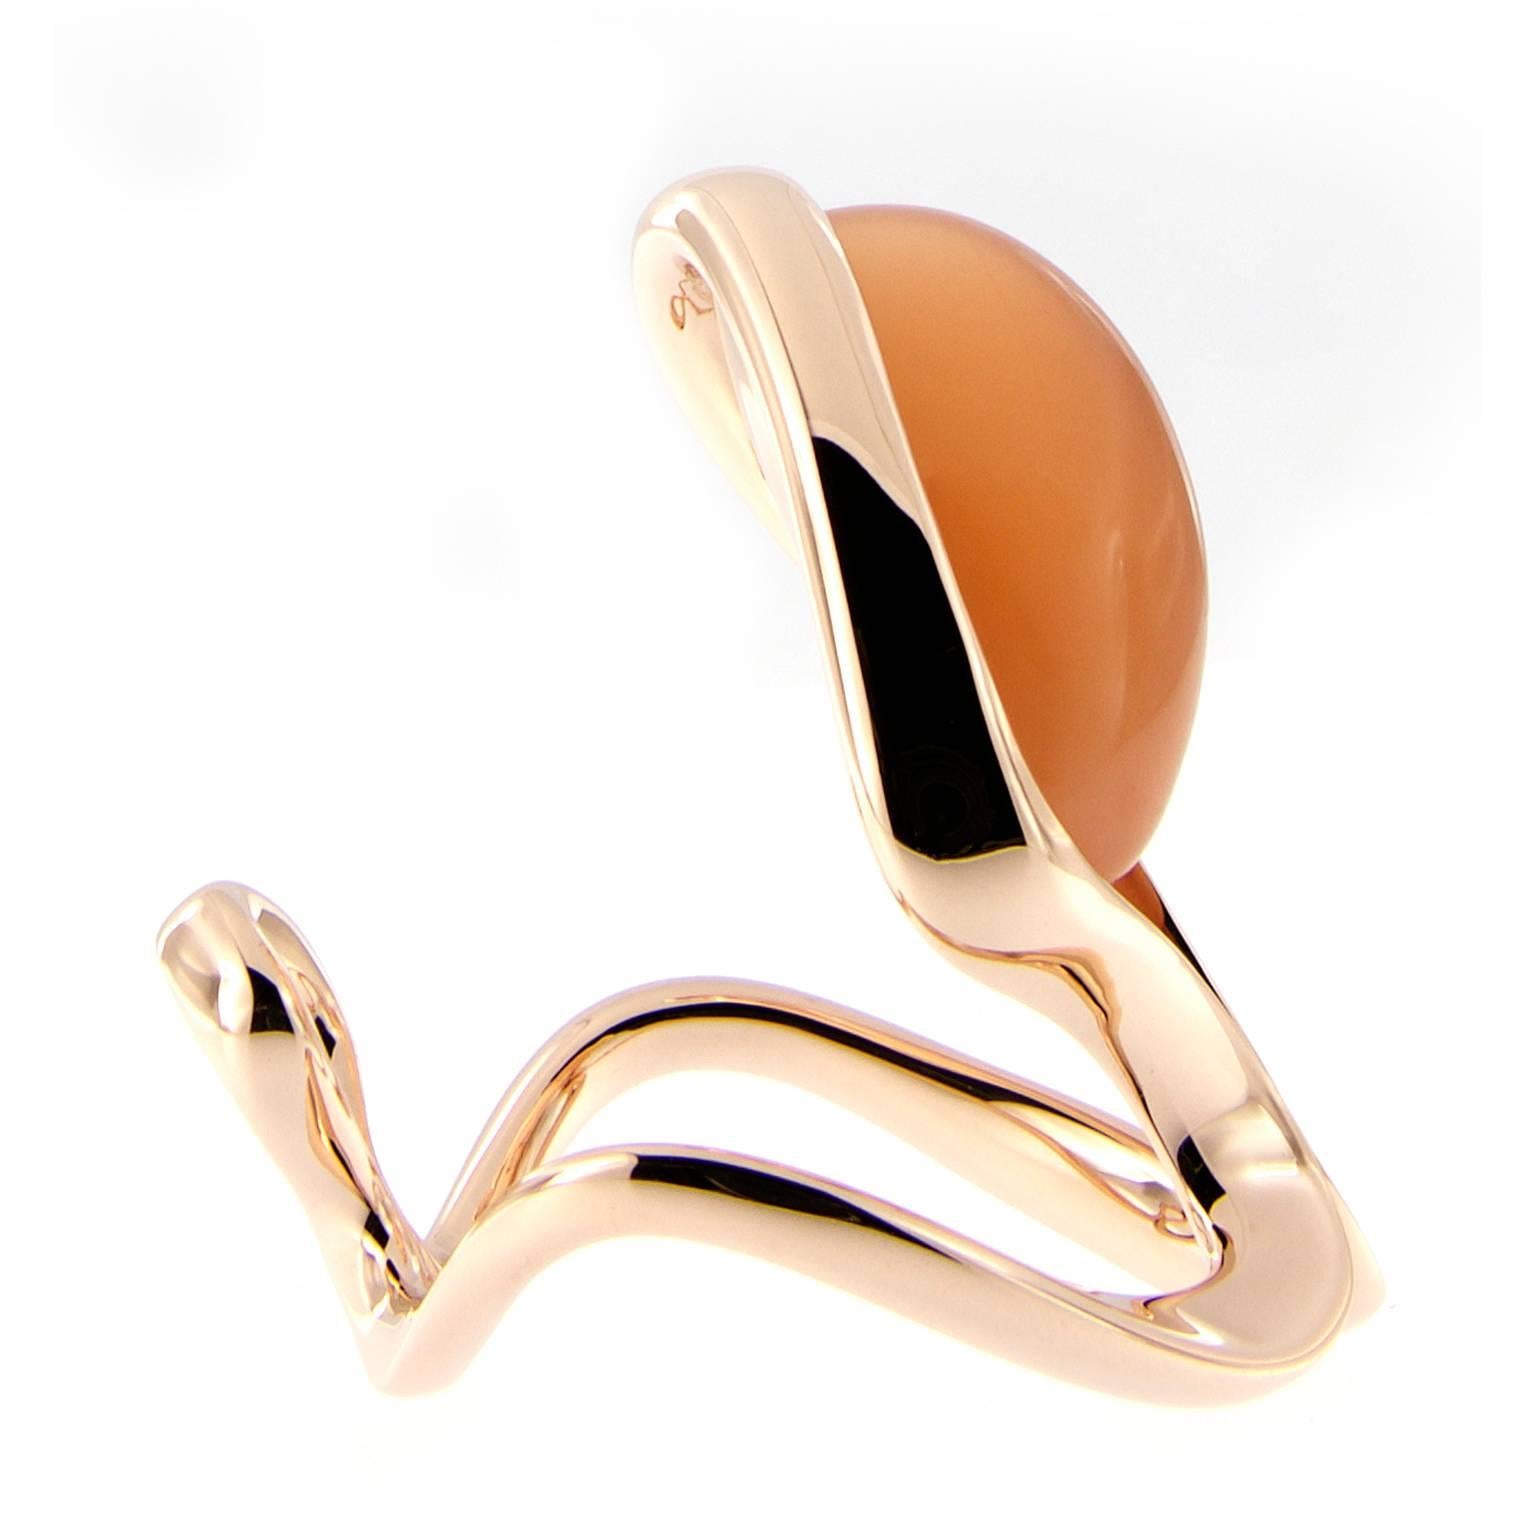 This beautifully crafted ring by Baenteli features a cabochon honey moonstone set in a graceful fluid design in 18k rose gold. Weighs 12.1 grams. 
Ring Size 6.5. Marked Baenteli.

Moonstone 8.30 ct